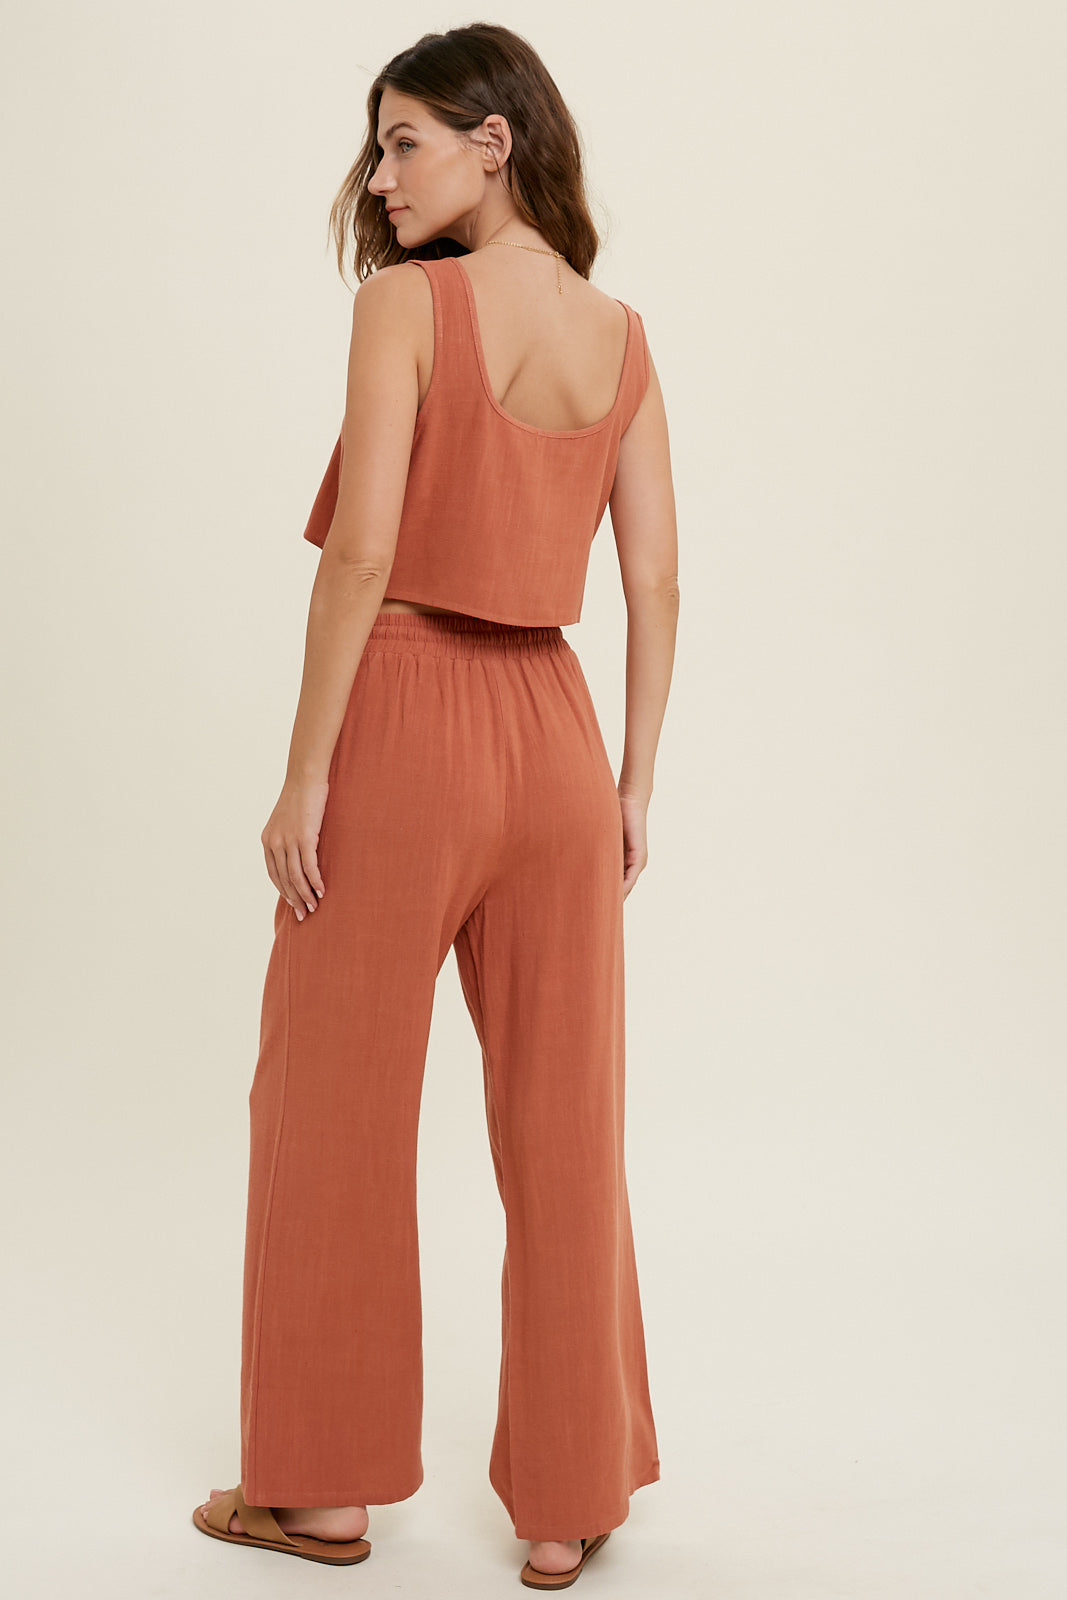 Wishlist® Linen Two Piece Crop Tank Top And Pants Set